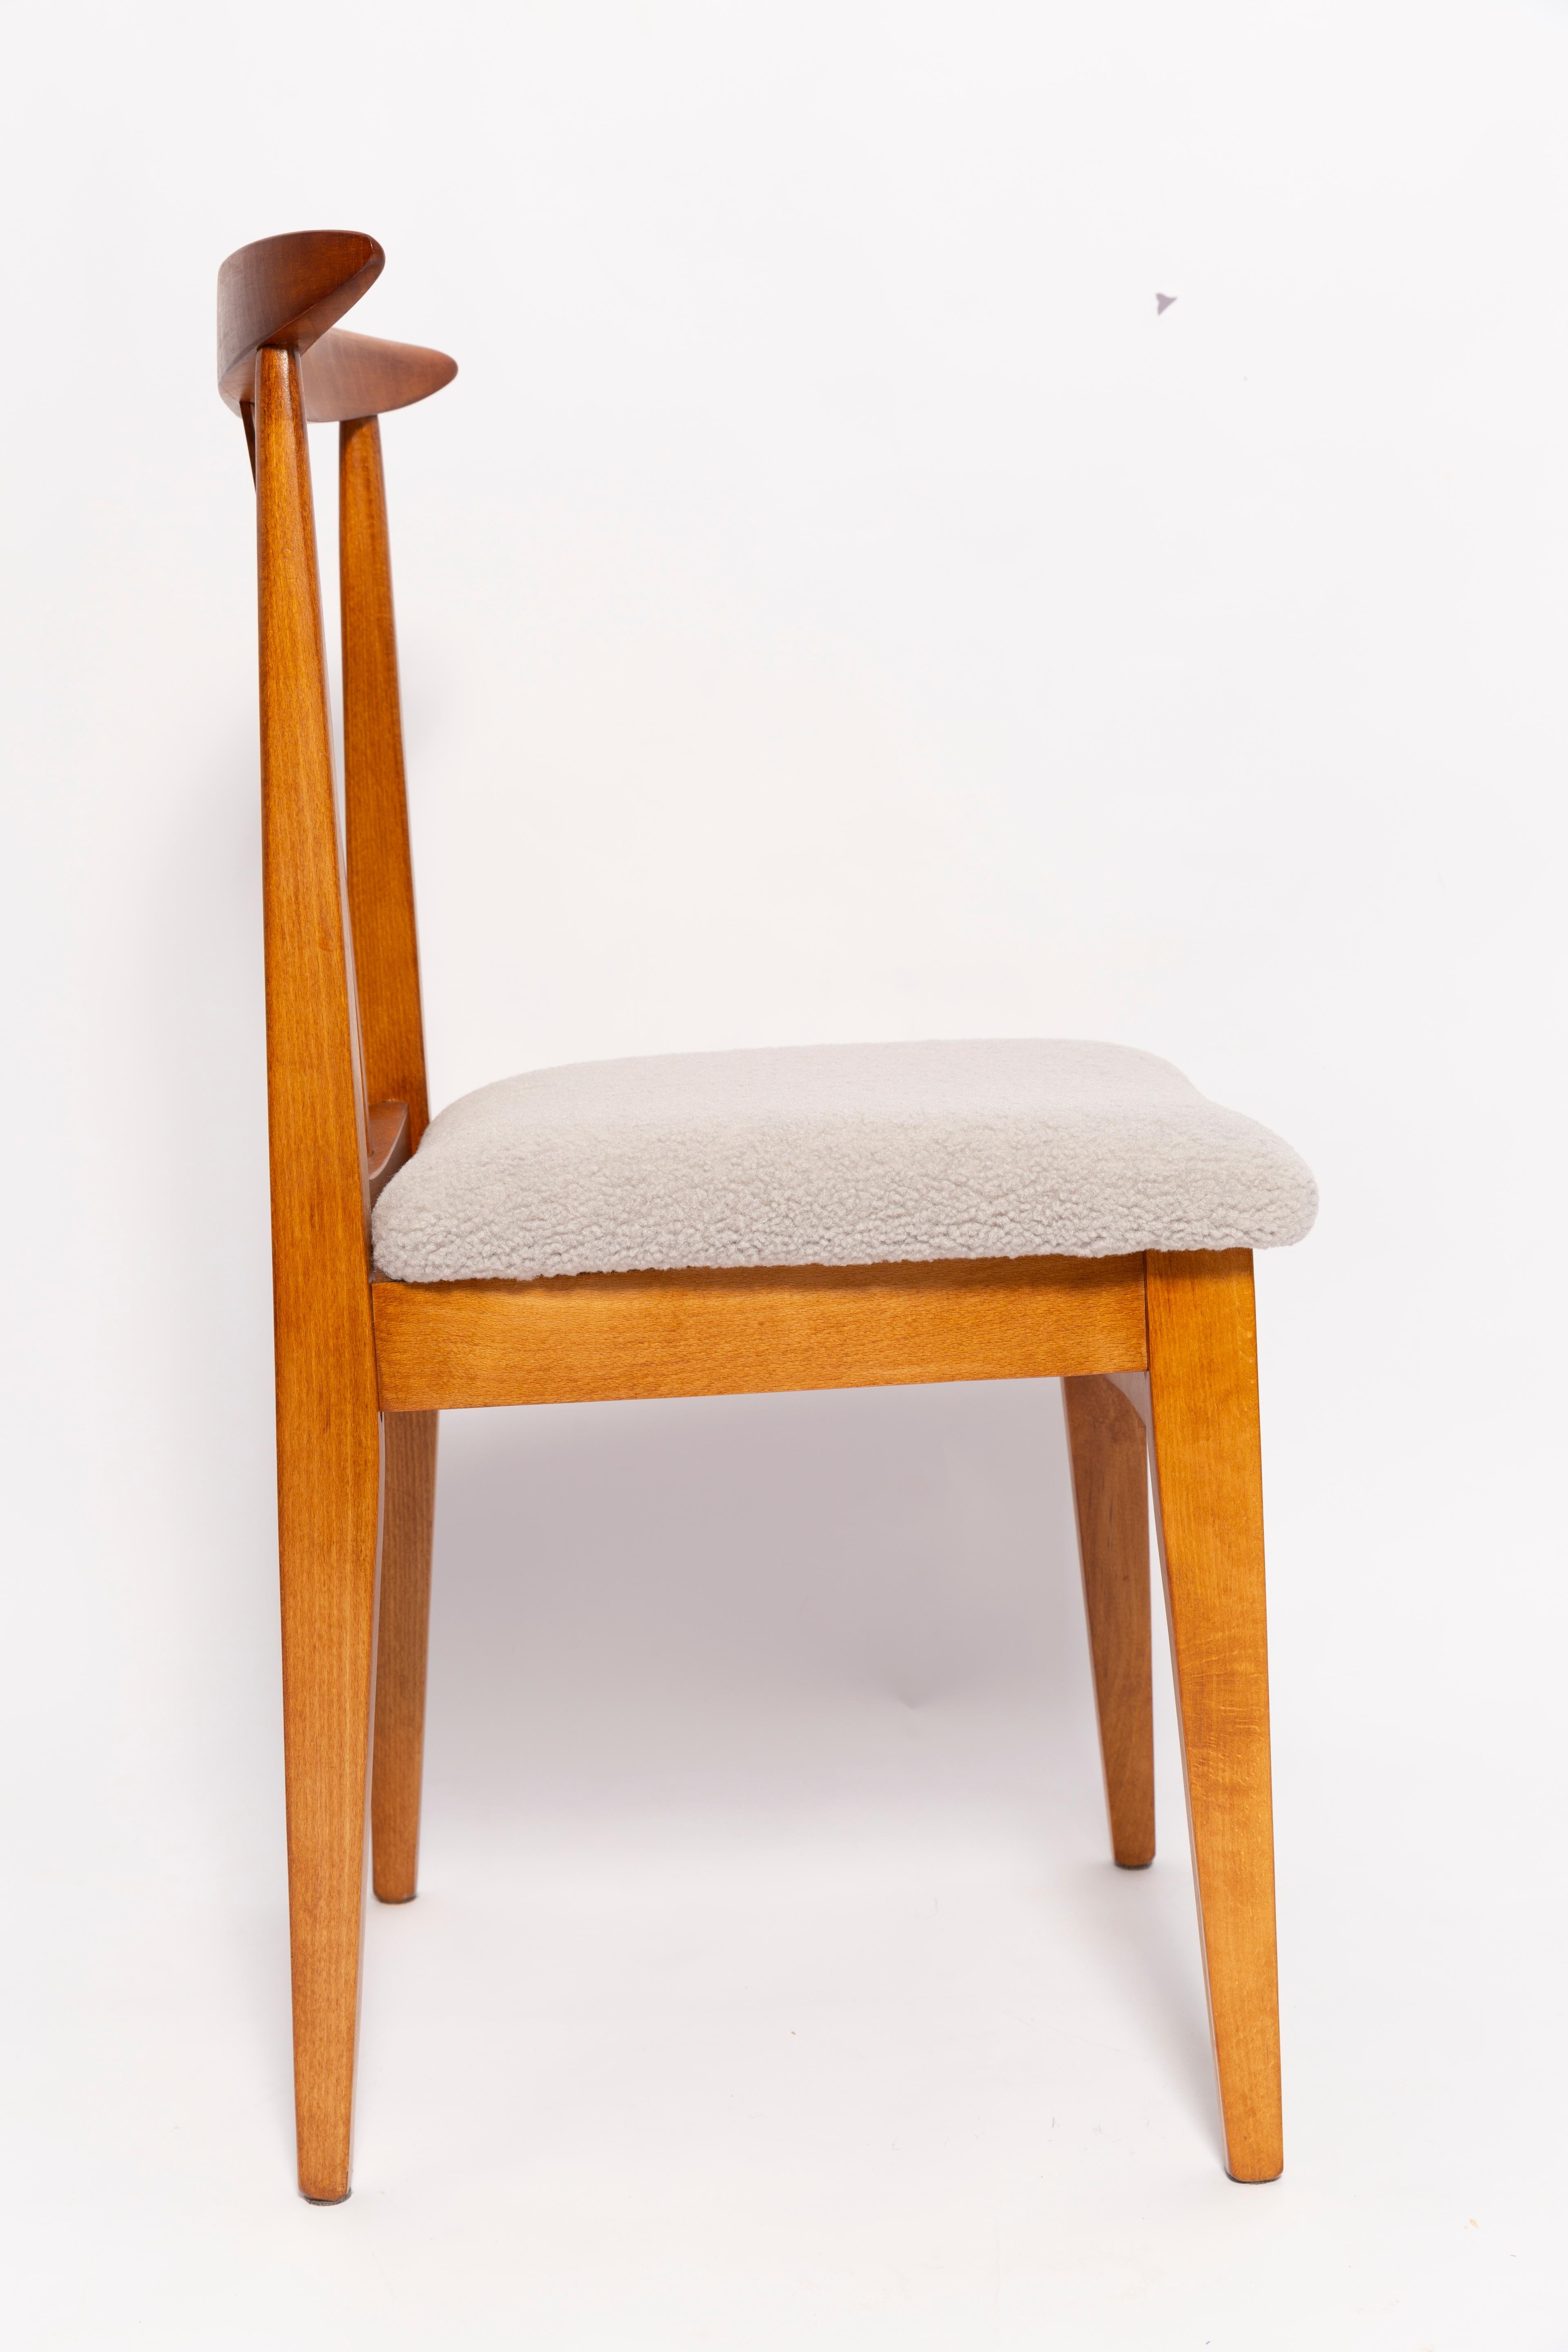 Polish Mid-Century Linen Boucle Chair, Designed by M. Zielinski, Europe, 1960s For Sale